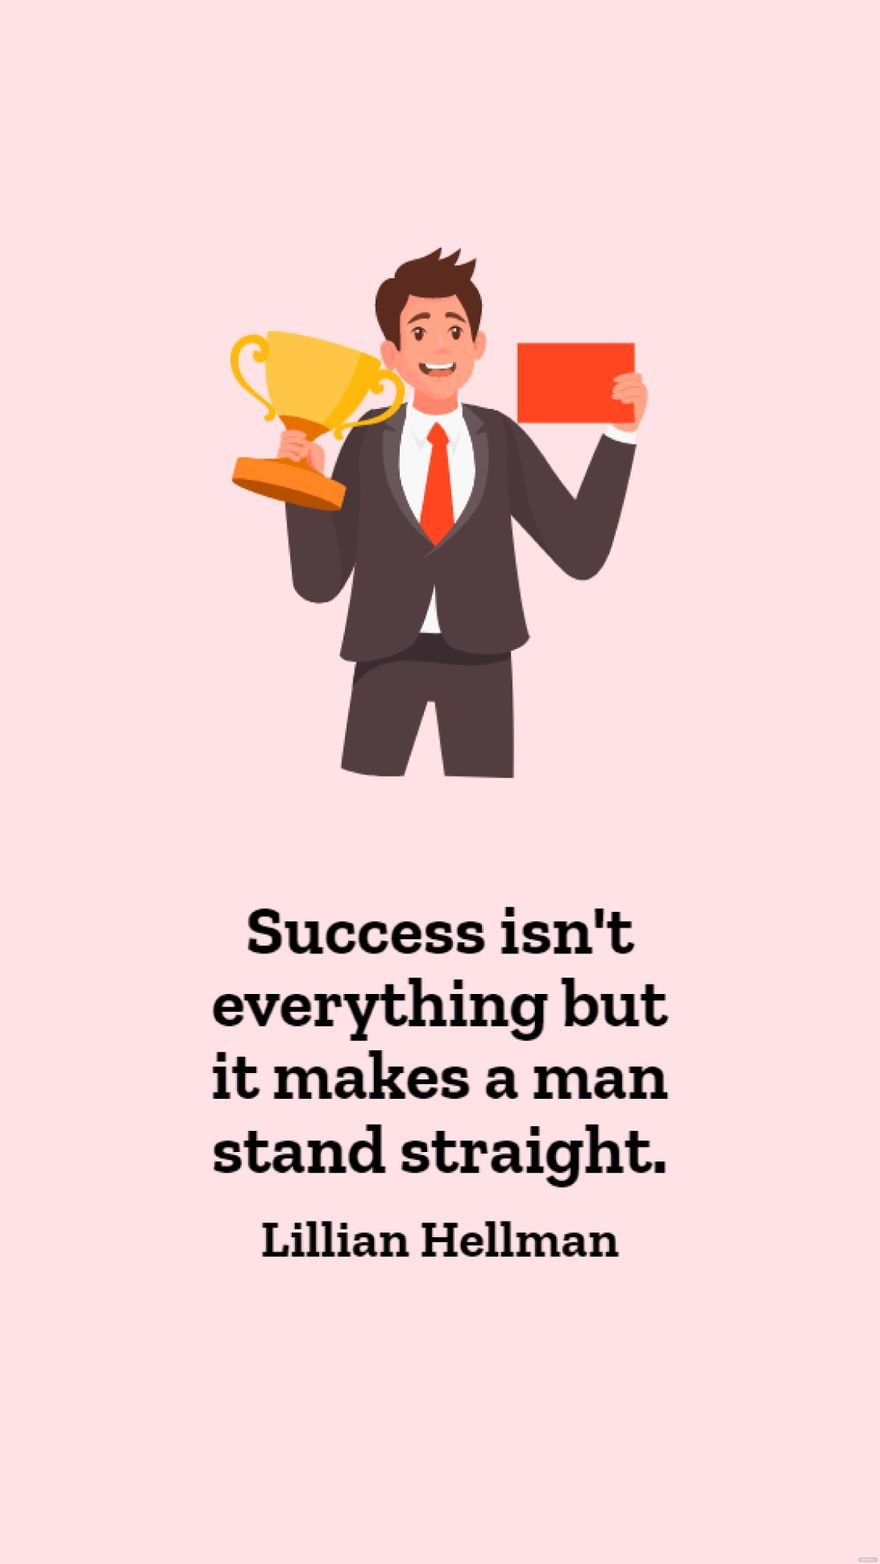 Lillian Hellman - Success isn't everything but it makes a man stand straight.